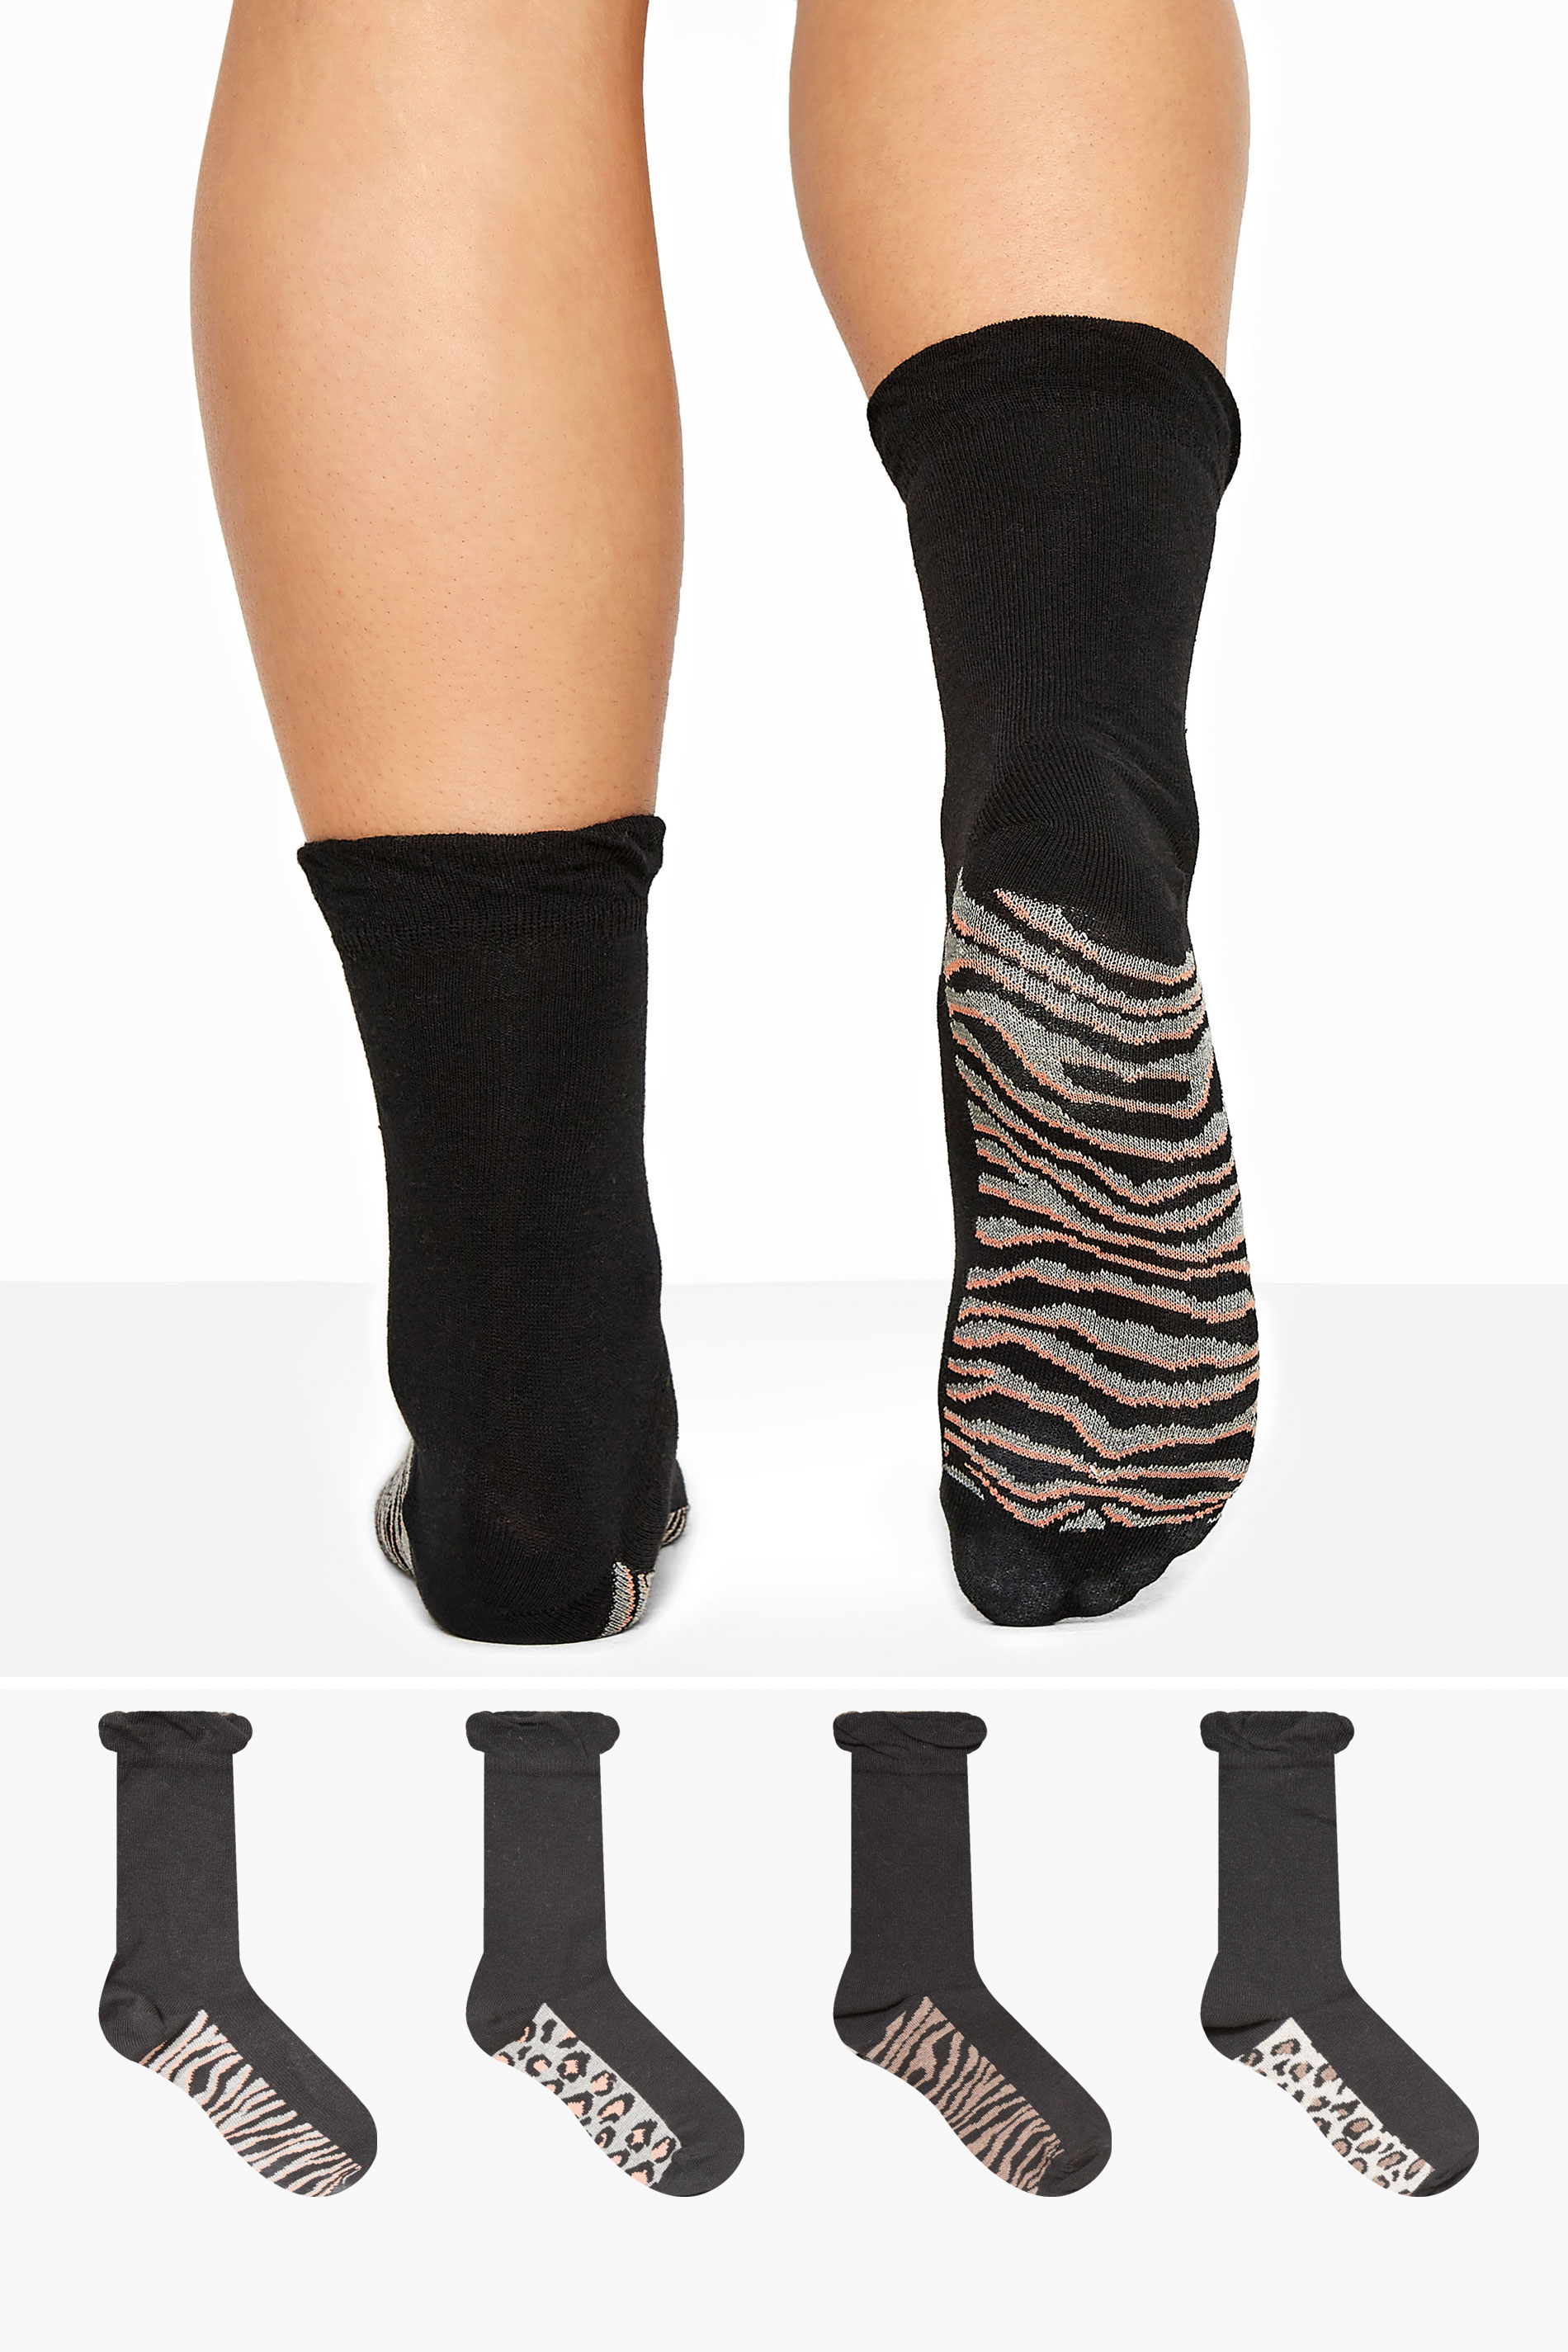 4 PACK Black Animal Print Footbed Socks | Yours Clothing 1